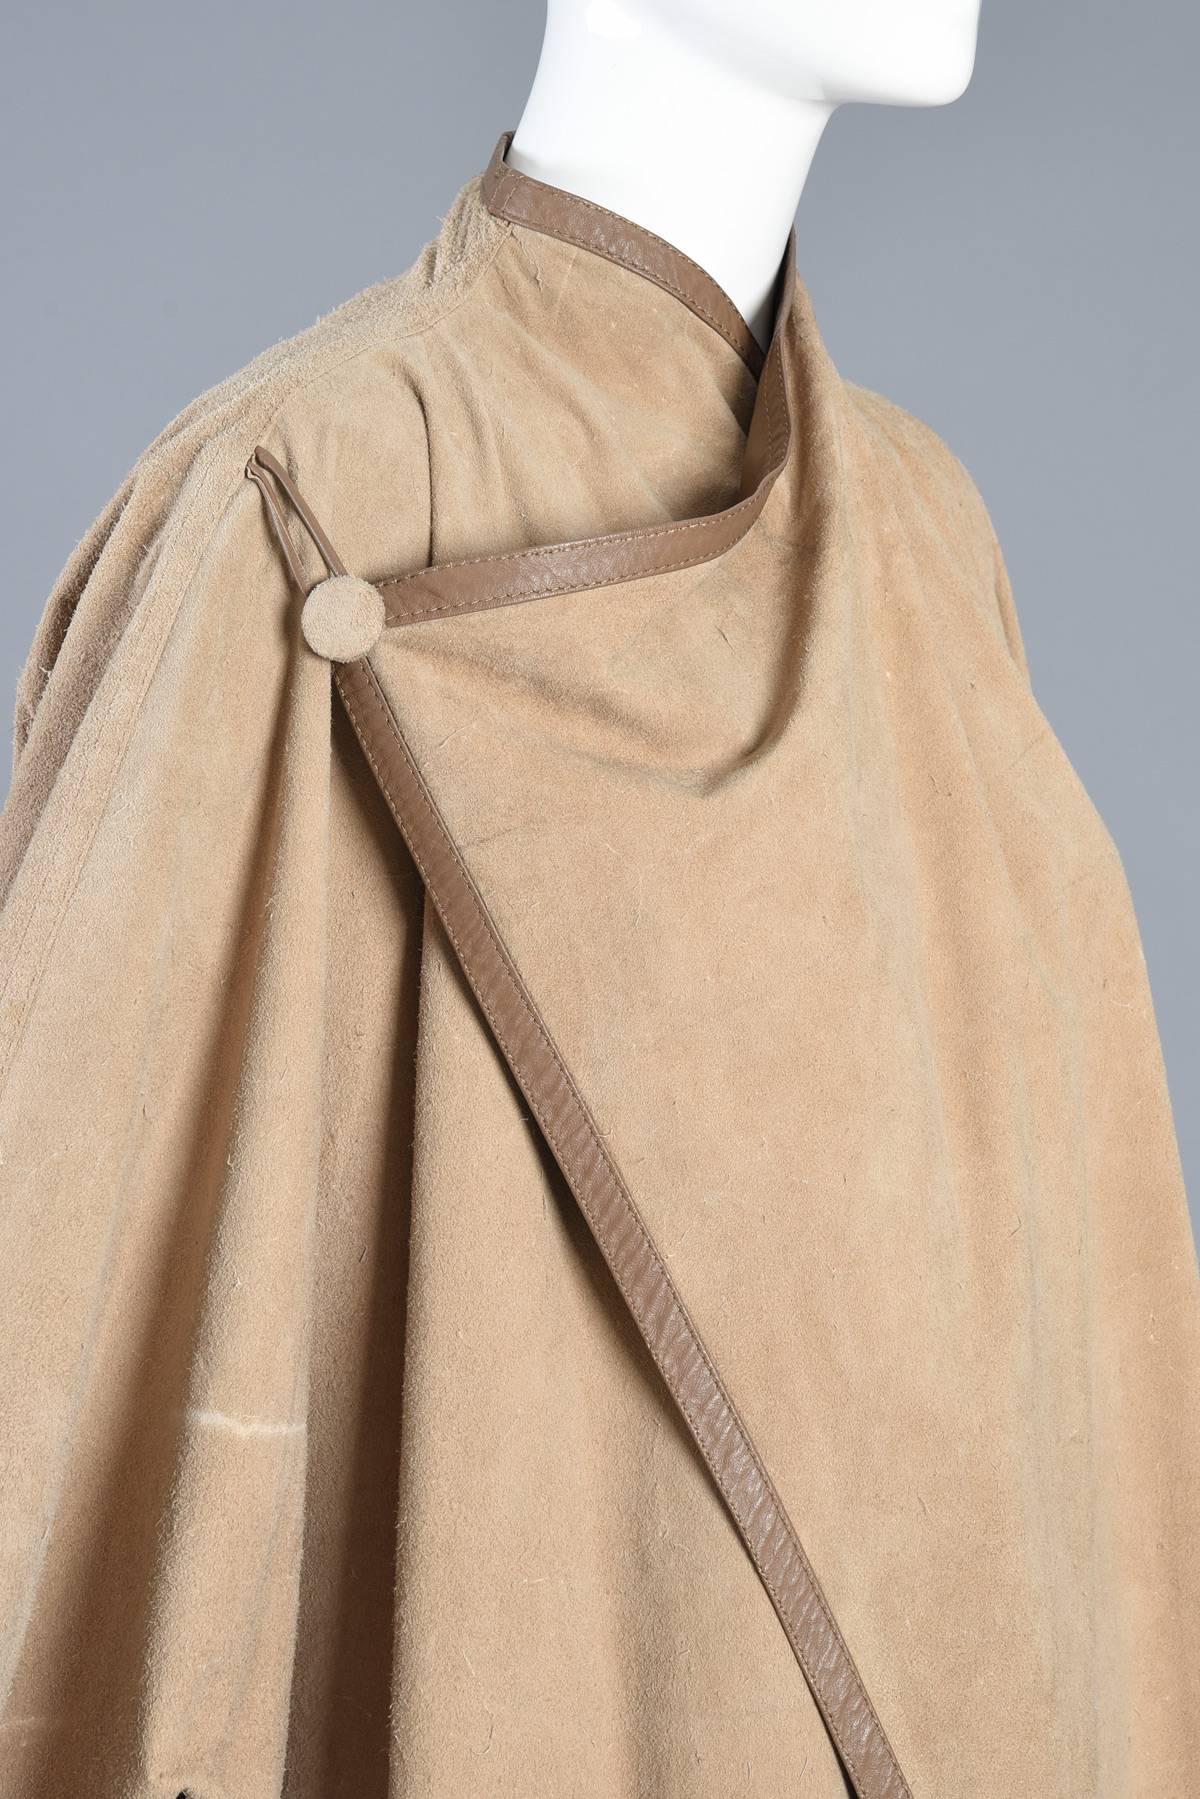 Women's or Men's Incredible 1980s Reversible Suede Leather Avant Garde Draped Cape For Sale